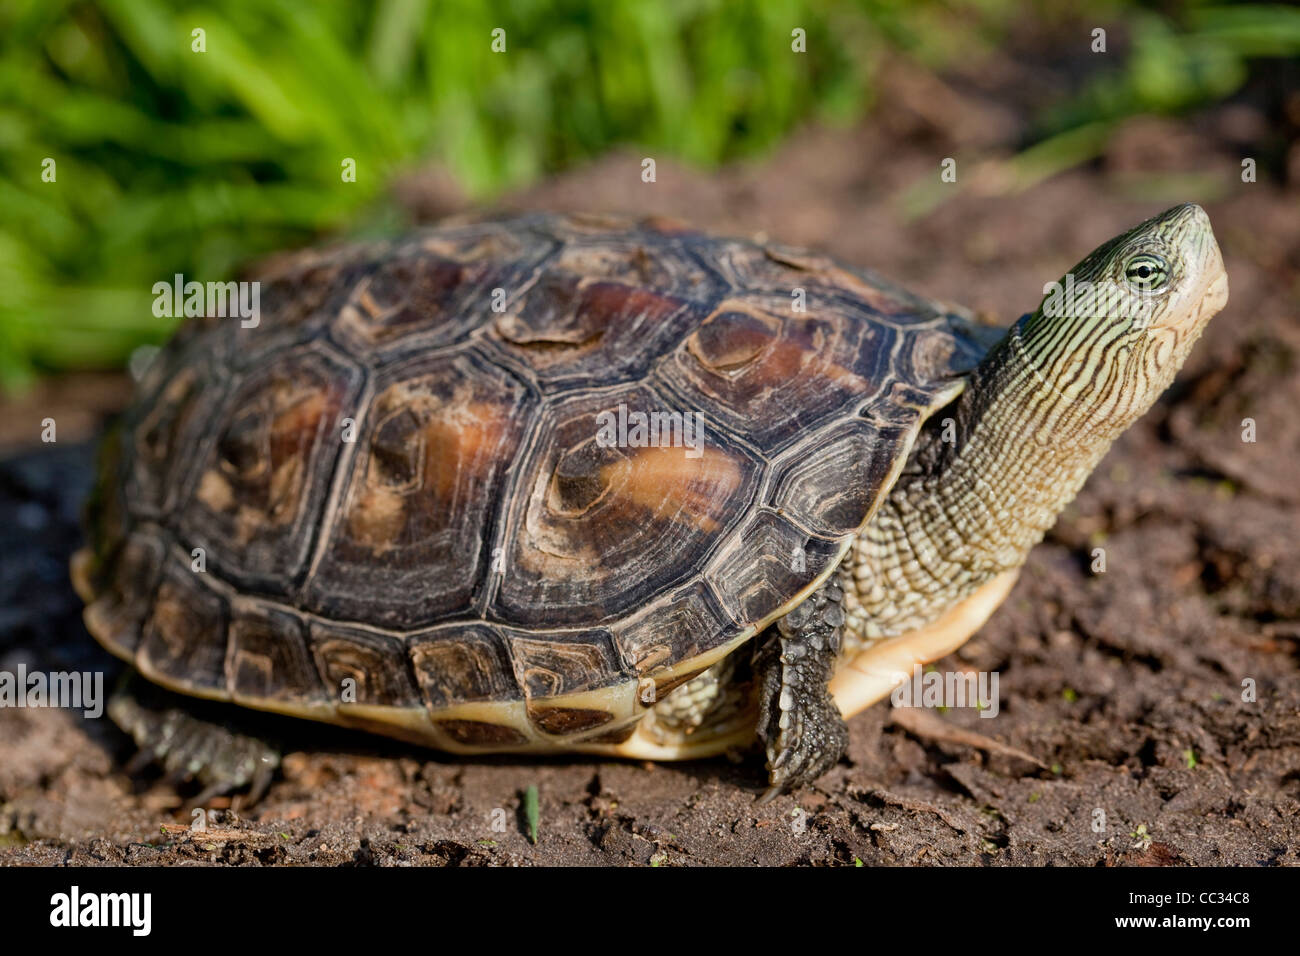 Chinese Stripe-necked Turtle (Ocadia sinensis). Adult. Extended neck showing stripe markings giving its popular name. Stock Photo